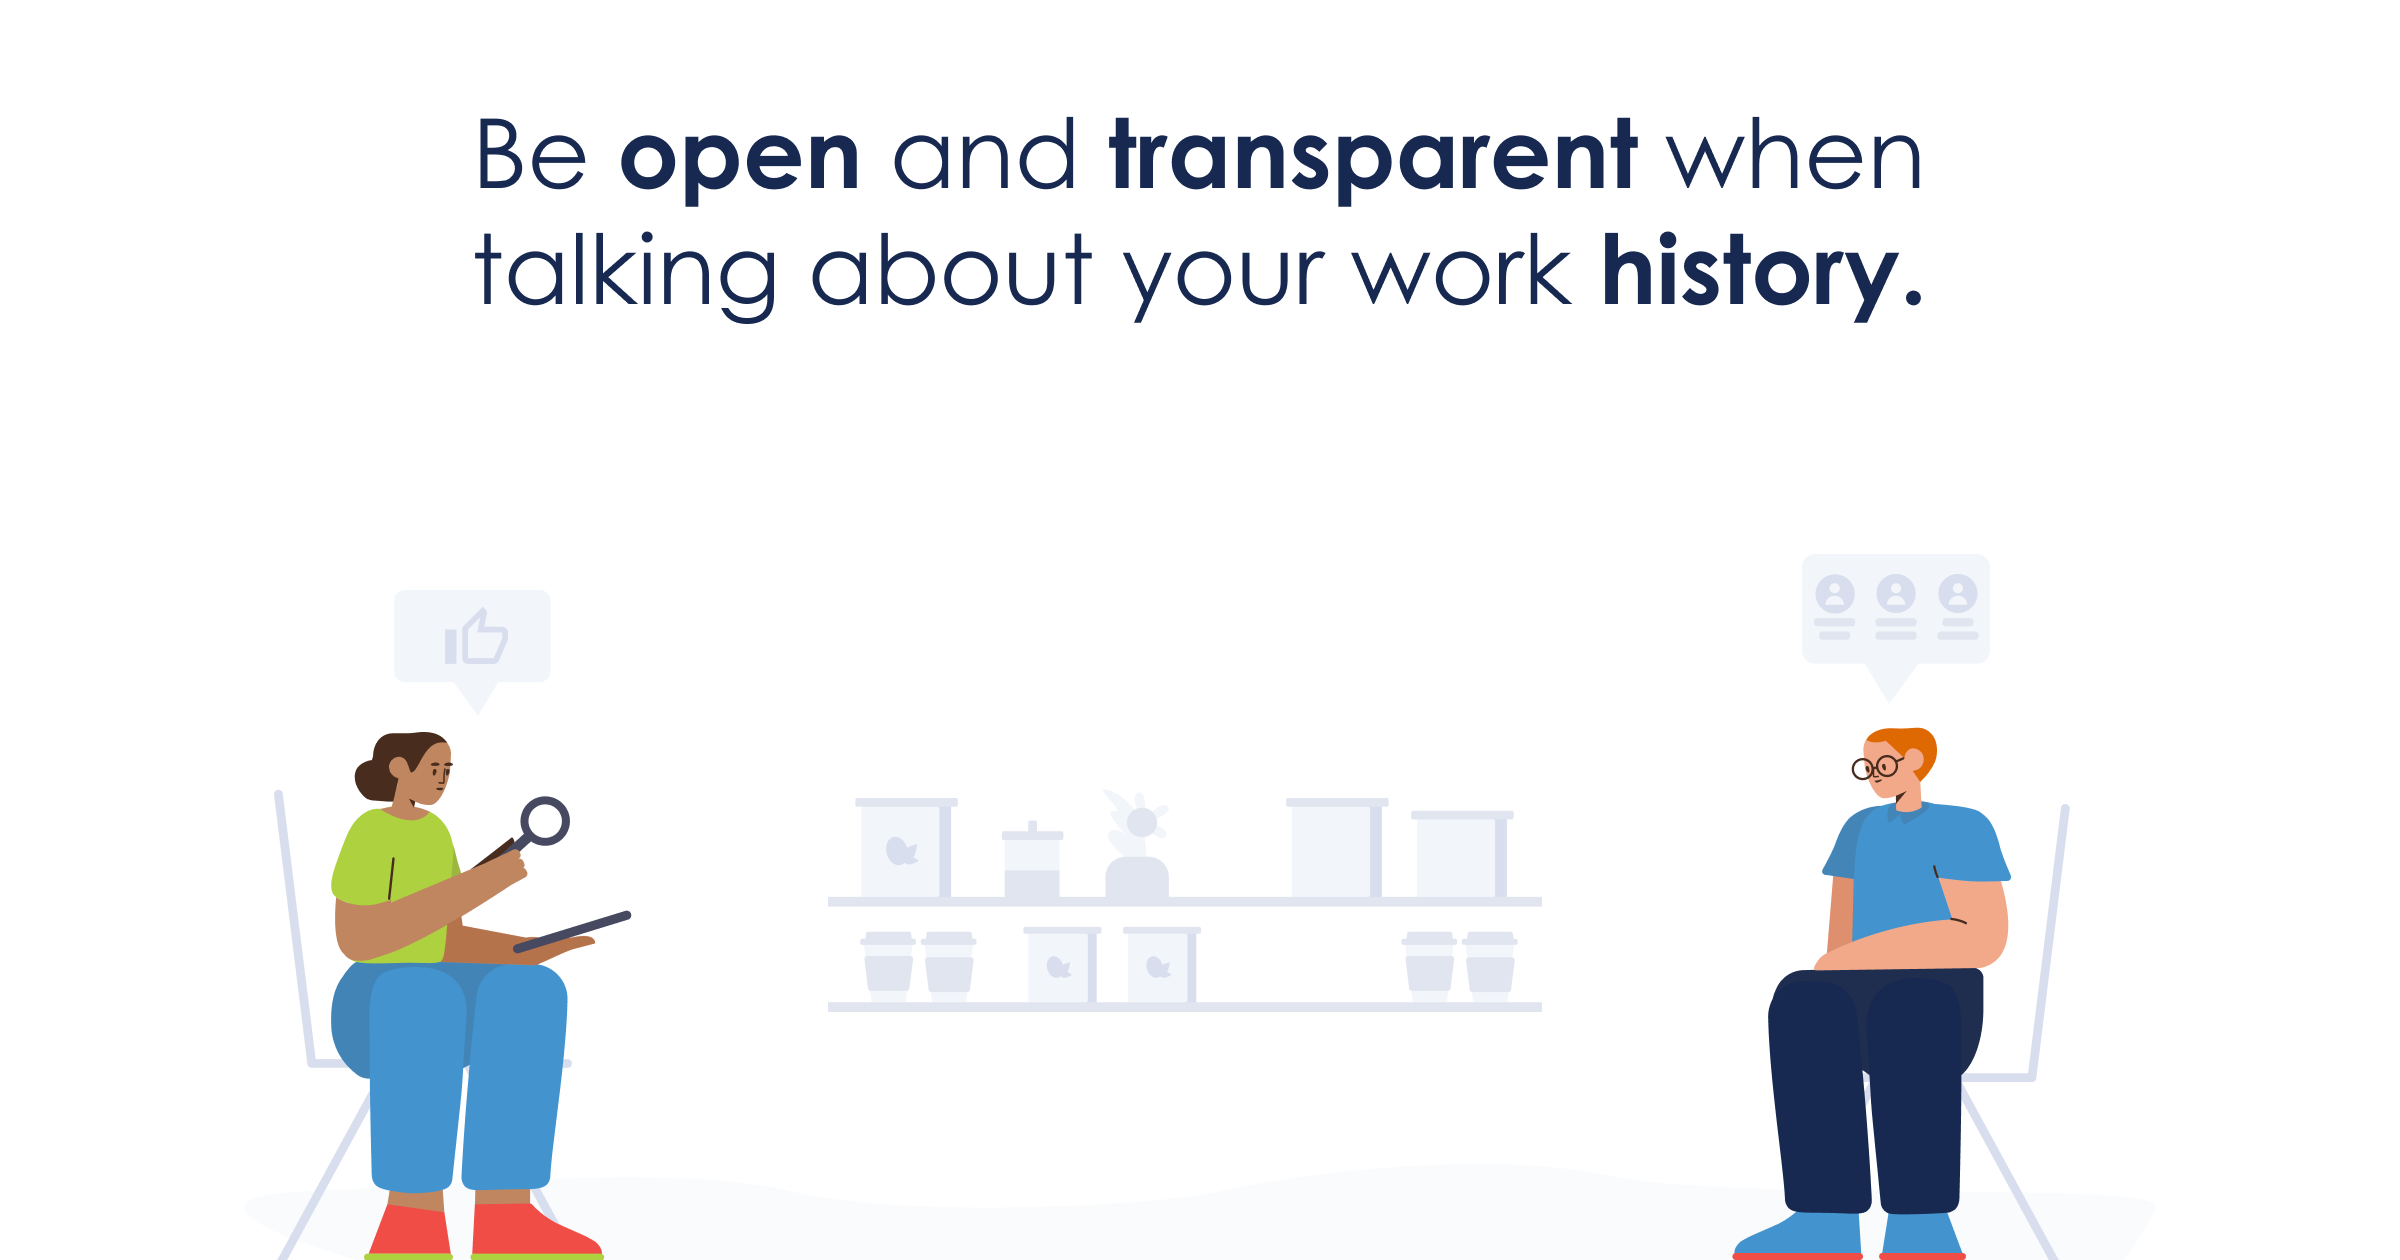 Be open and transparent when talking about your work history